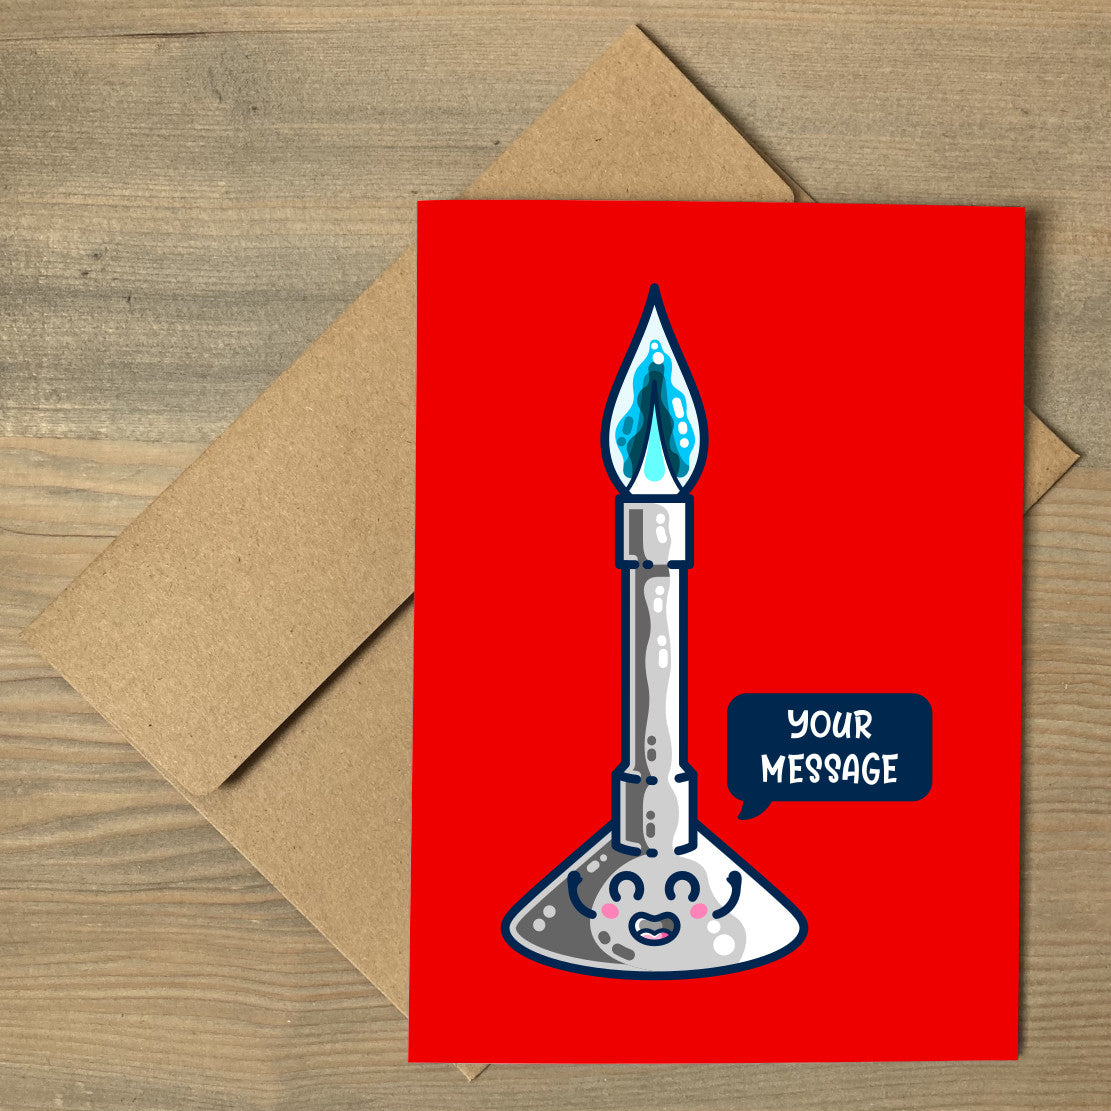 A brown envelope beneath a red greeting card that features a kawaii cute bunsen burner lit with a blue flame and a speech bubble with your own personalised message inside